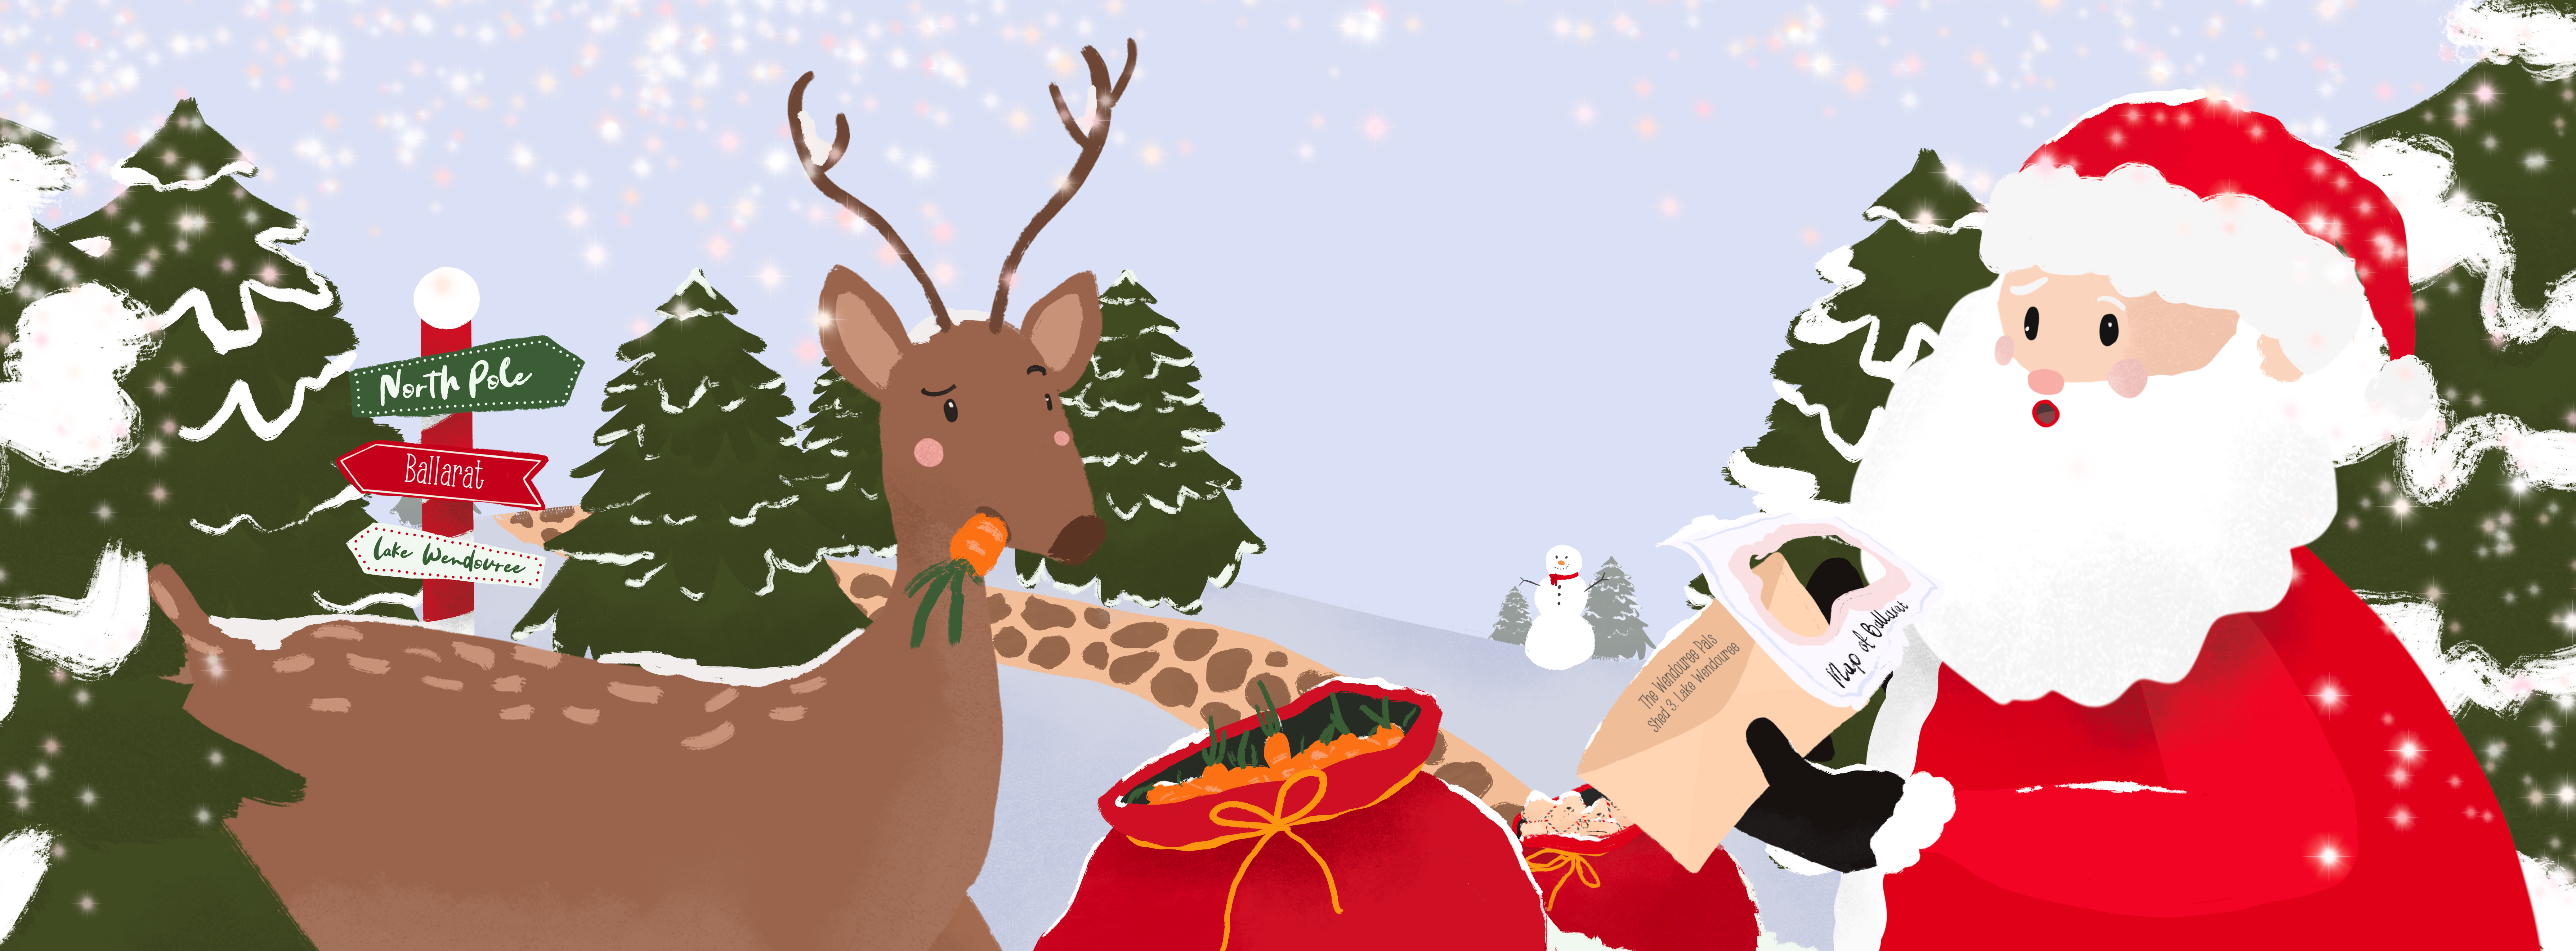 Image of an illustration from the 'Christmas in Ballarat' children's book by Liv Lorkin, depicting Santa looking surprised at a hole in the paper map of Ballarat, while a cheeky reindeer with a carrot in its mouth looks on curiously. The background shows a snowy scene from the North Pole.